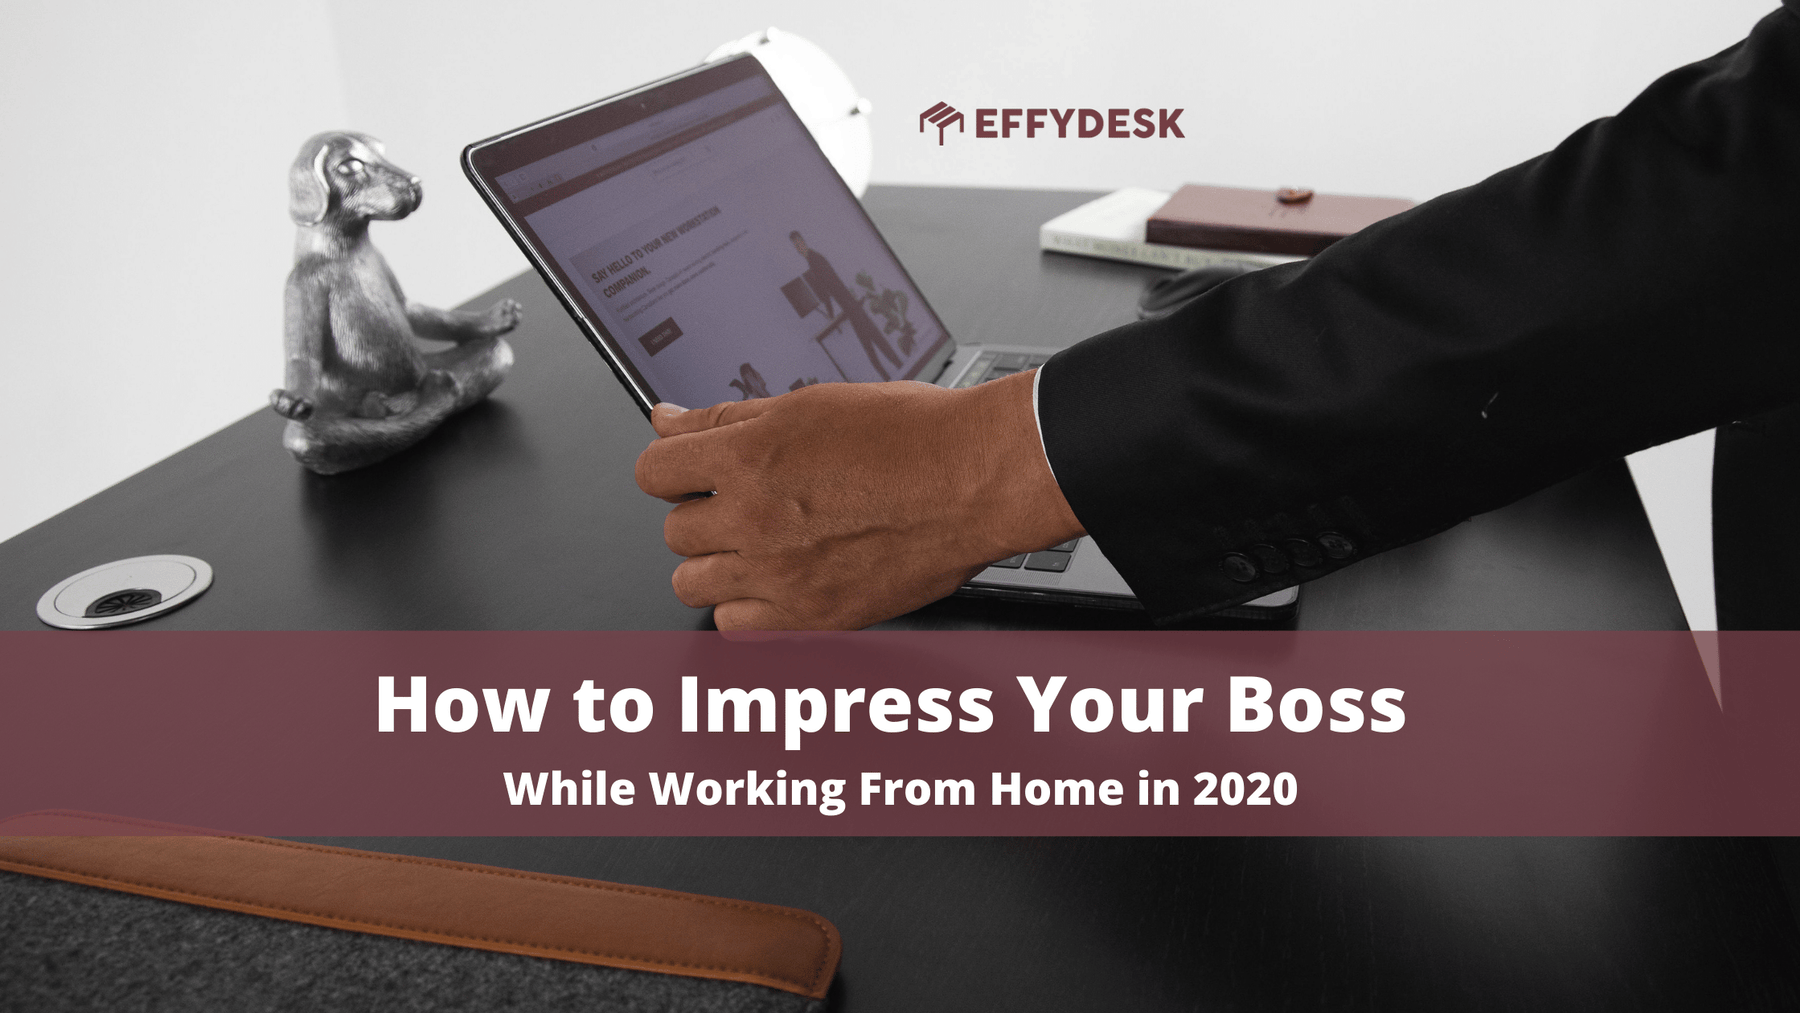 How to Impress Your Boss While Working From Home in 2020